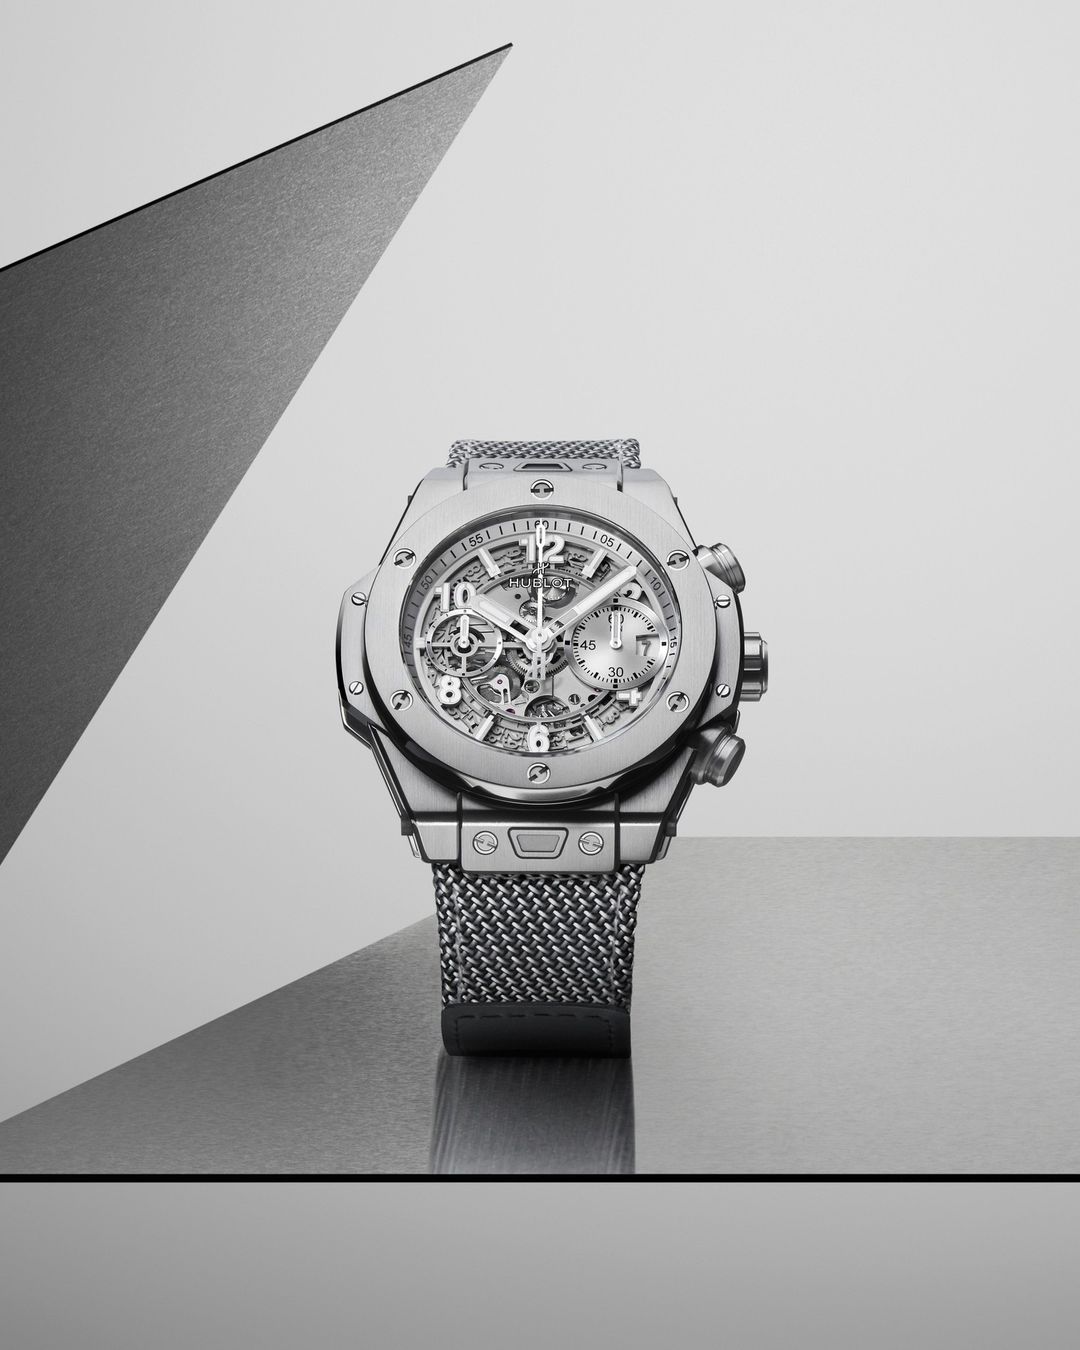 hublot@instagram on Pinno: With its contemporary, monochrome look,